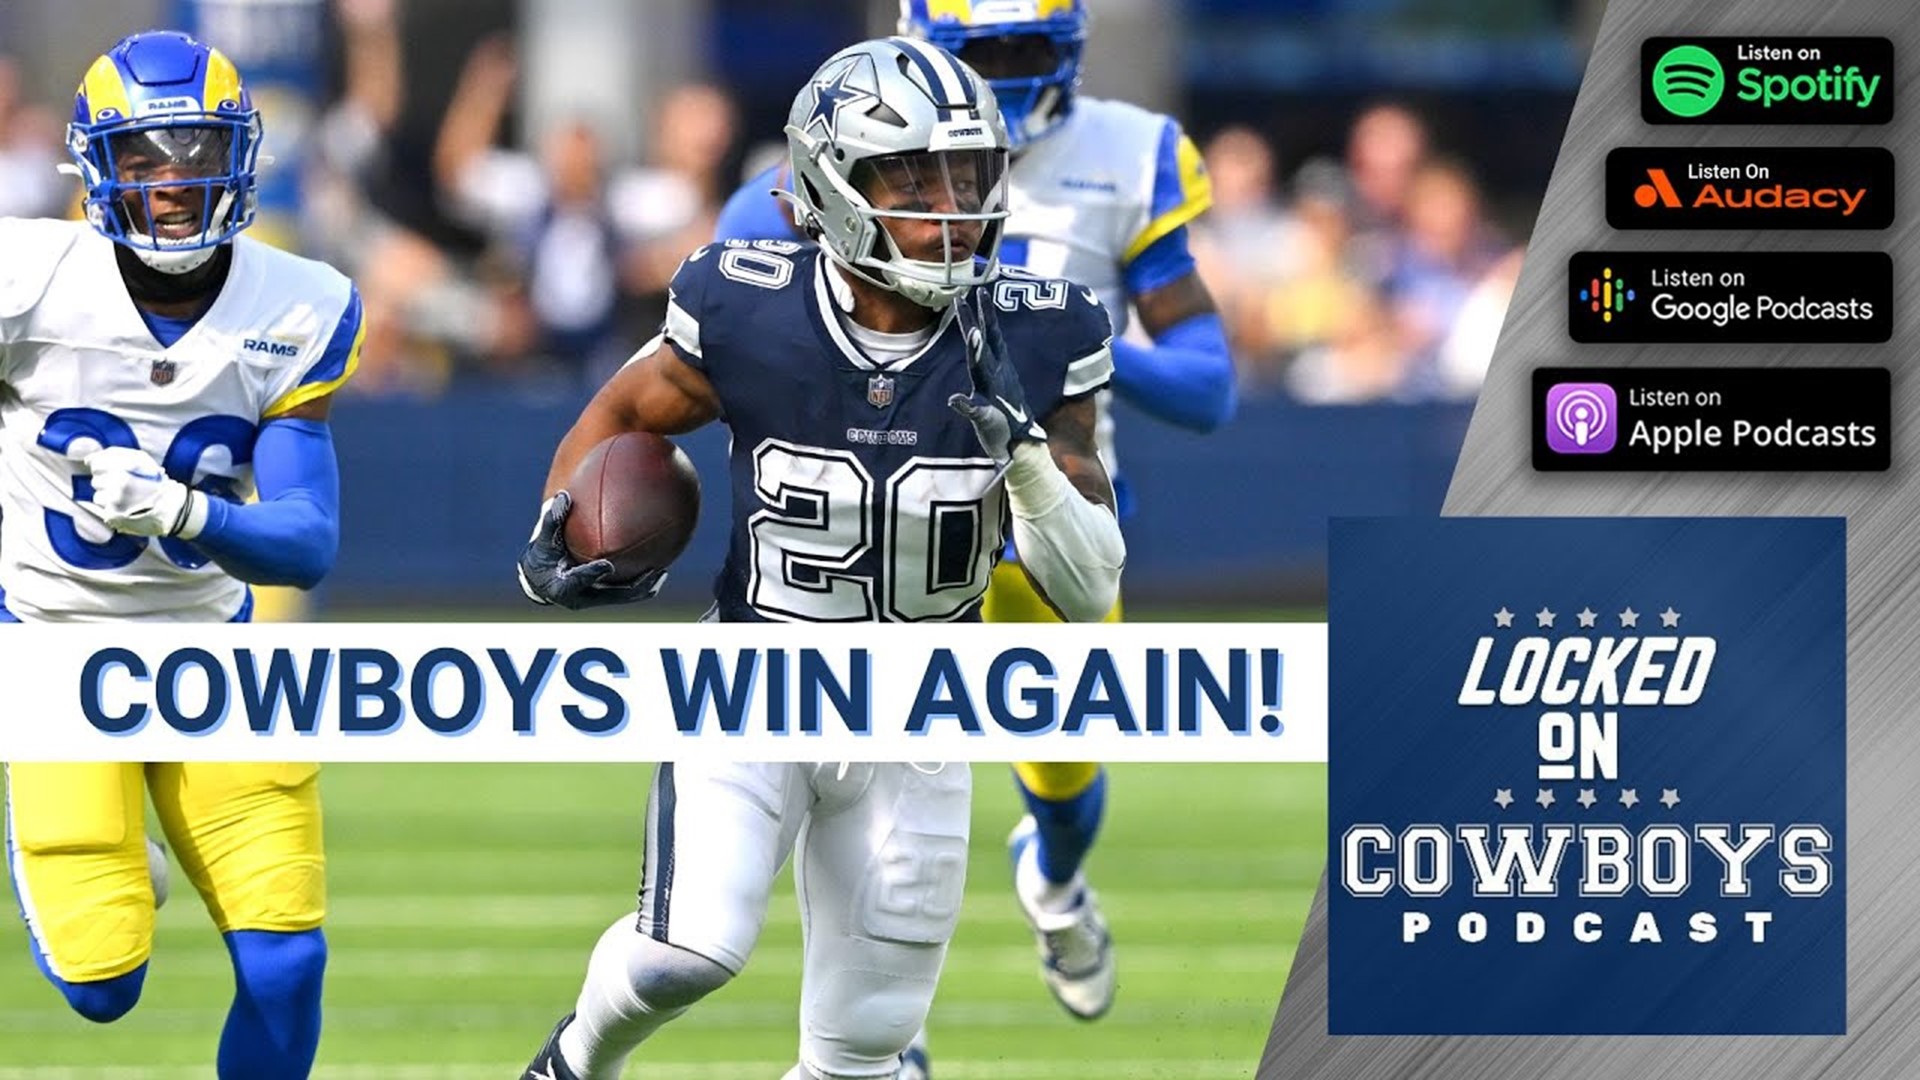 Marcus Mosher and Landon McCool of Locked On Cowboys discuss the Dallas Cowboys upsetting the Los Angeles Rams in Week 5.